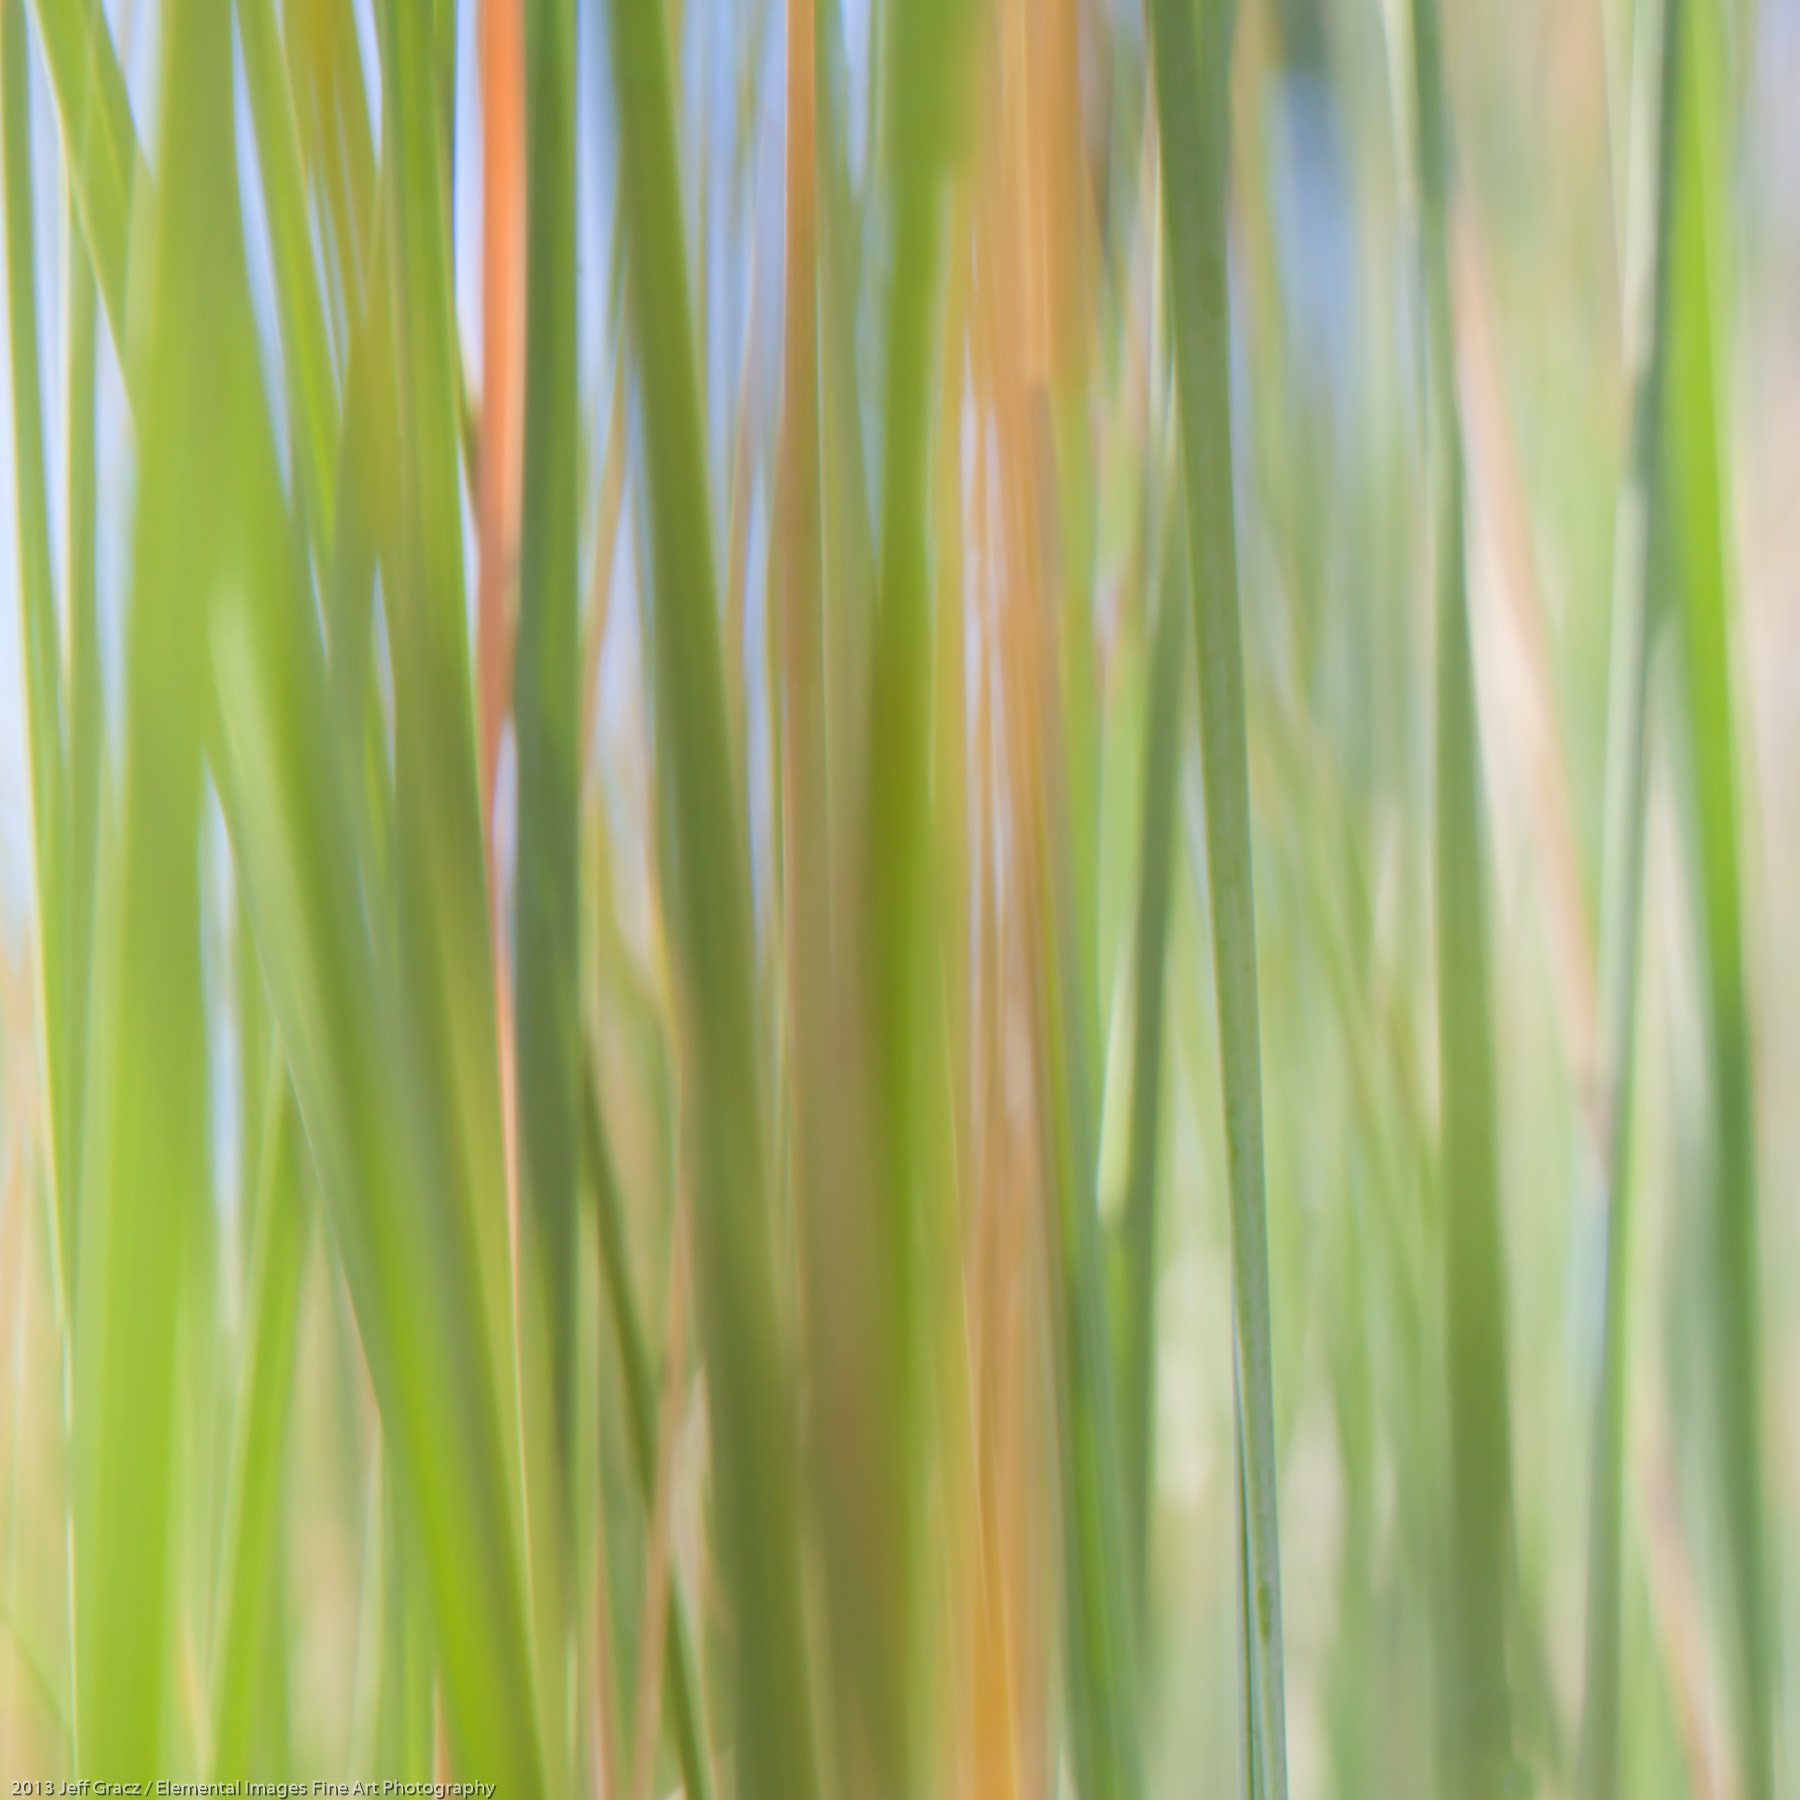 Grasses LXII | Portland | OR | USA - © 2013 Jeff Gracz / Elemental Images Fine Art Photography - All Rights Reserved Worldwide